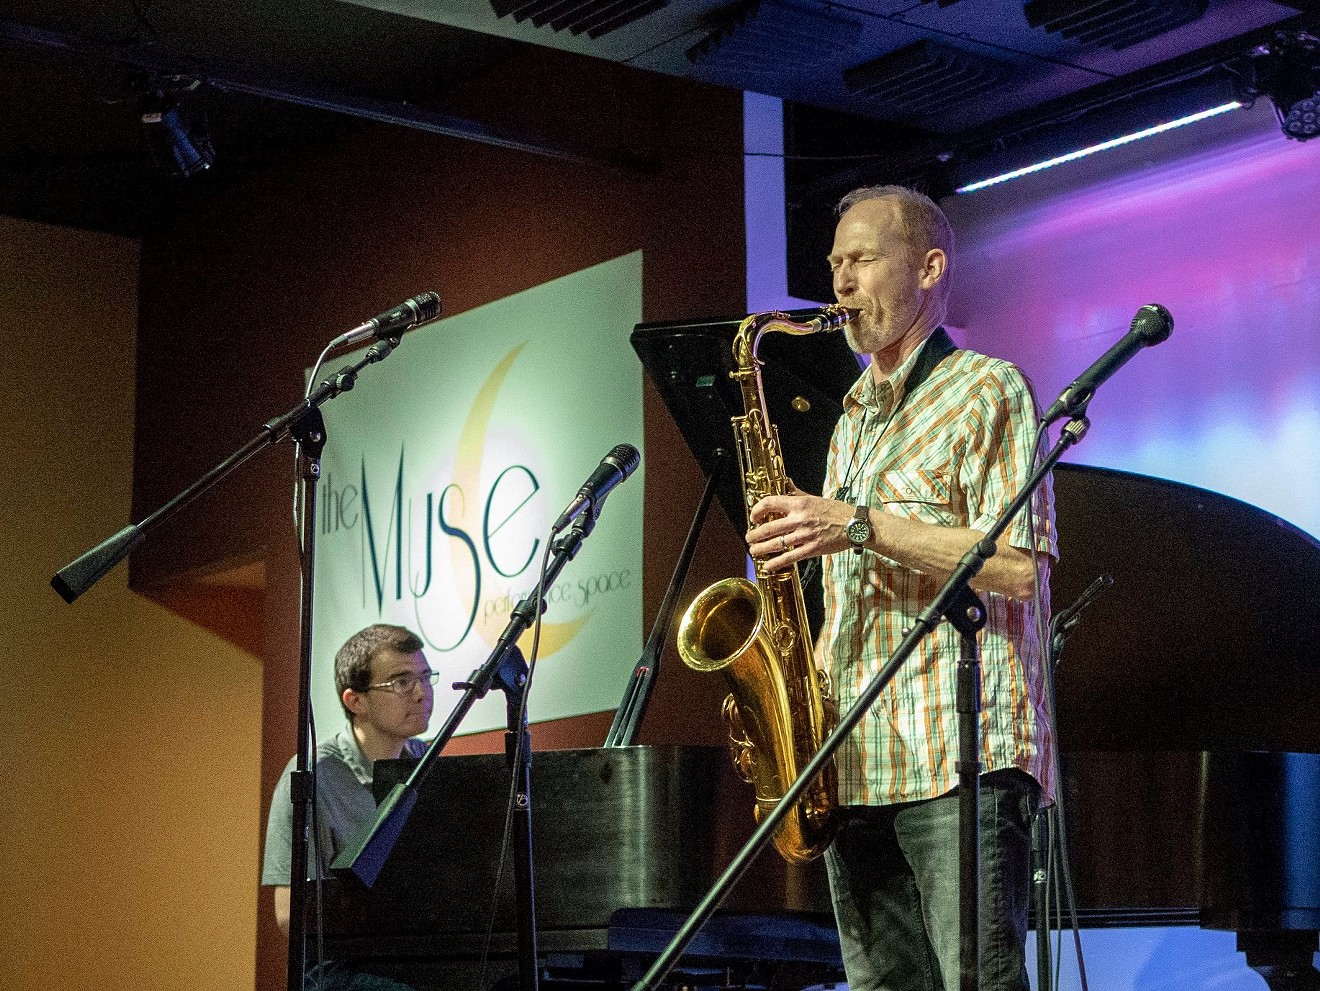 Saxophonist Pete Lewis performs at the Muse, the new venue in Lafayette that he operates with his wife.